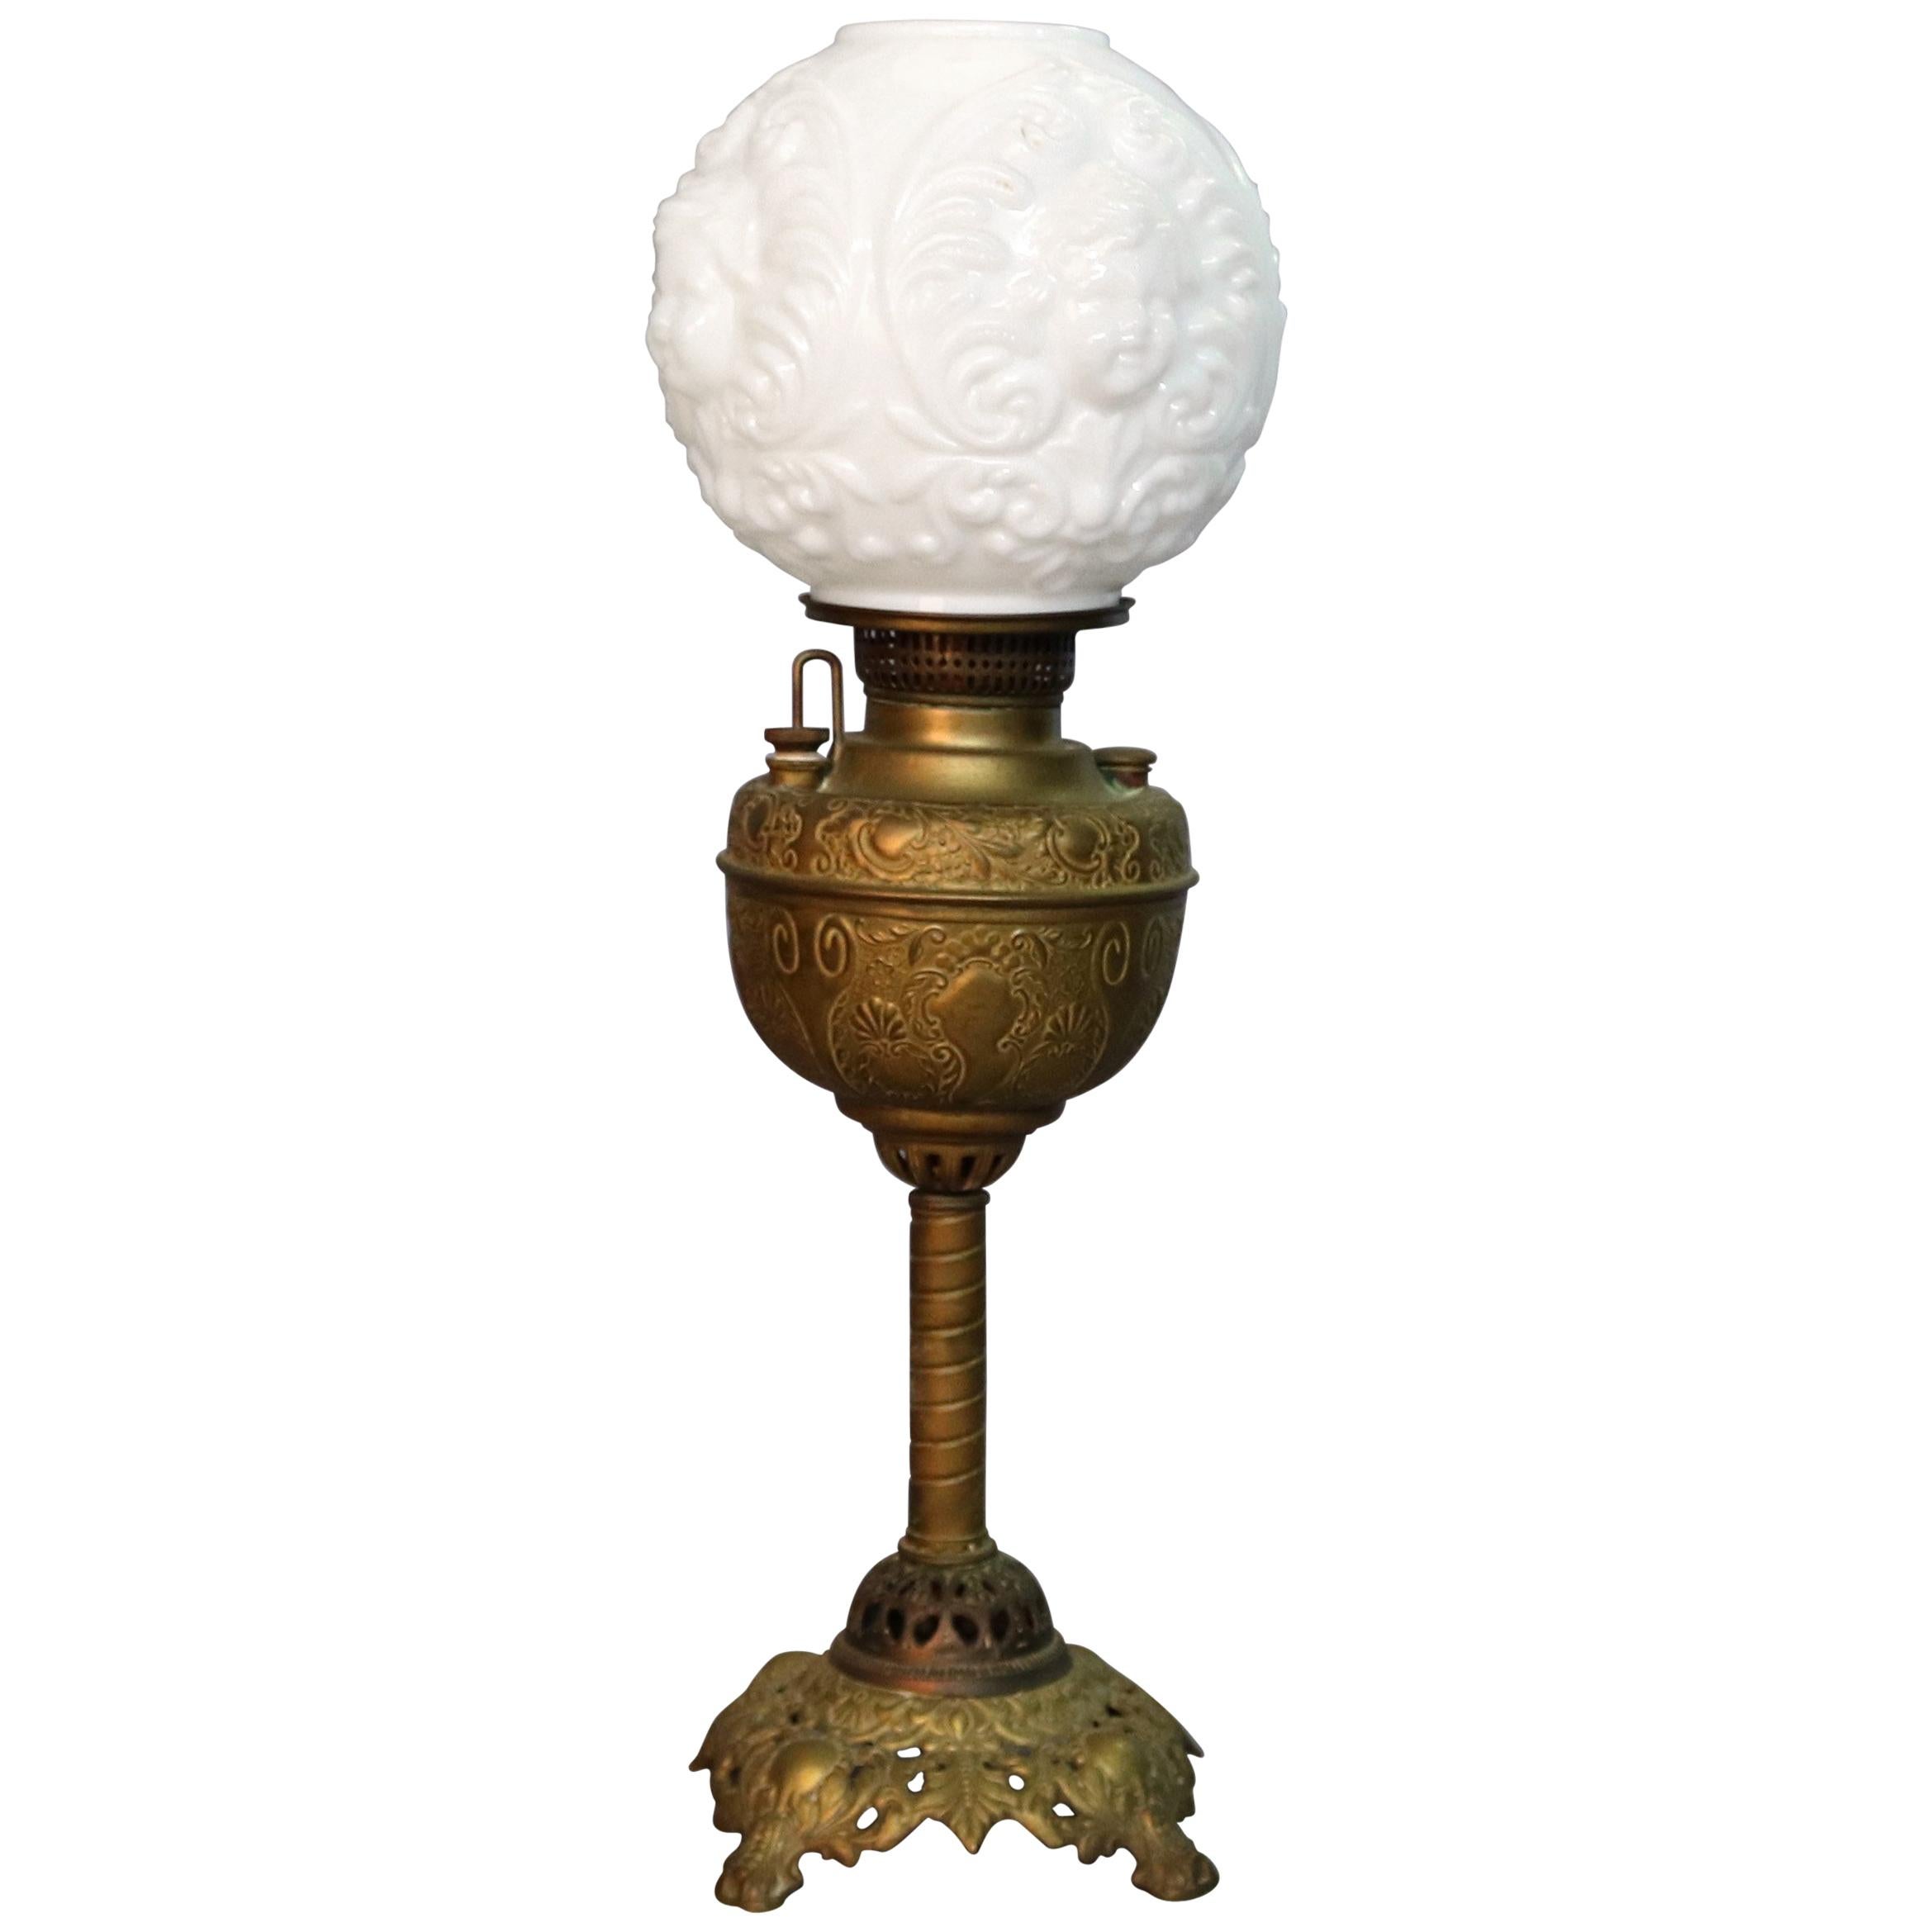 Antique Gone with the Wind Oil Lamp, Blown Out Milk Glass Cherub Shade